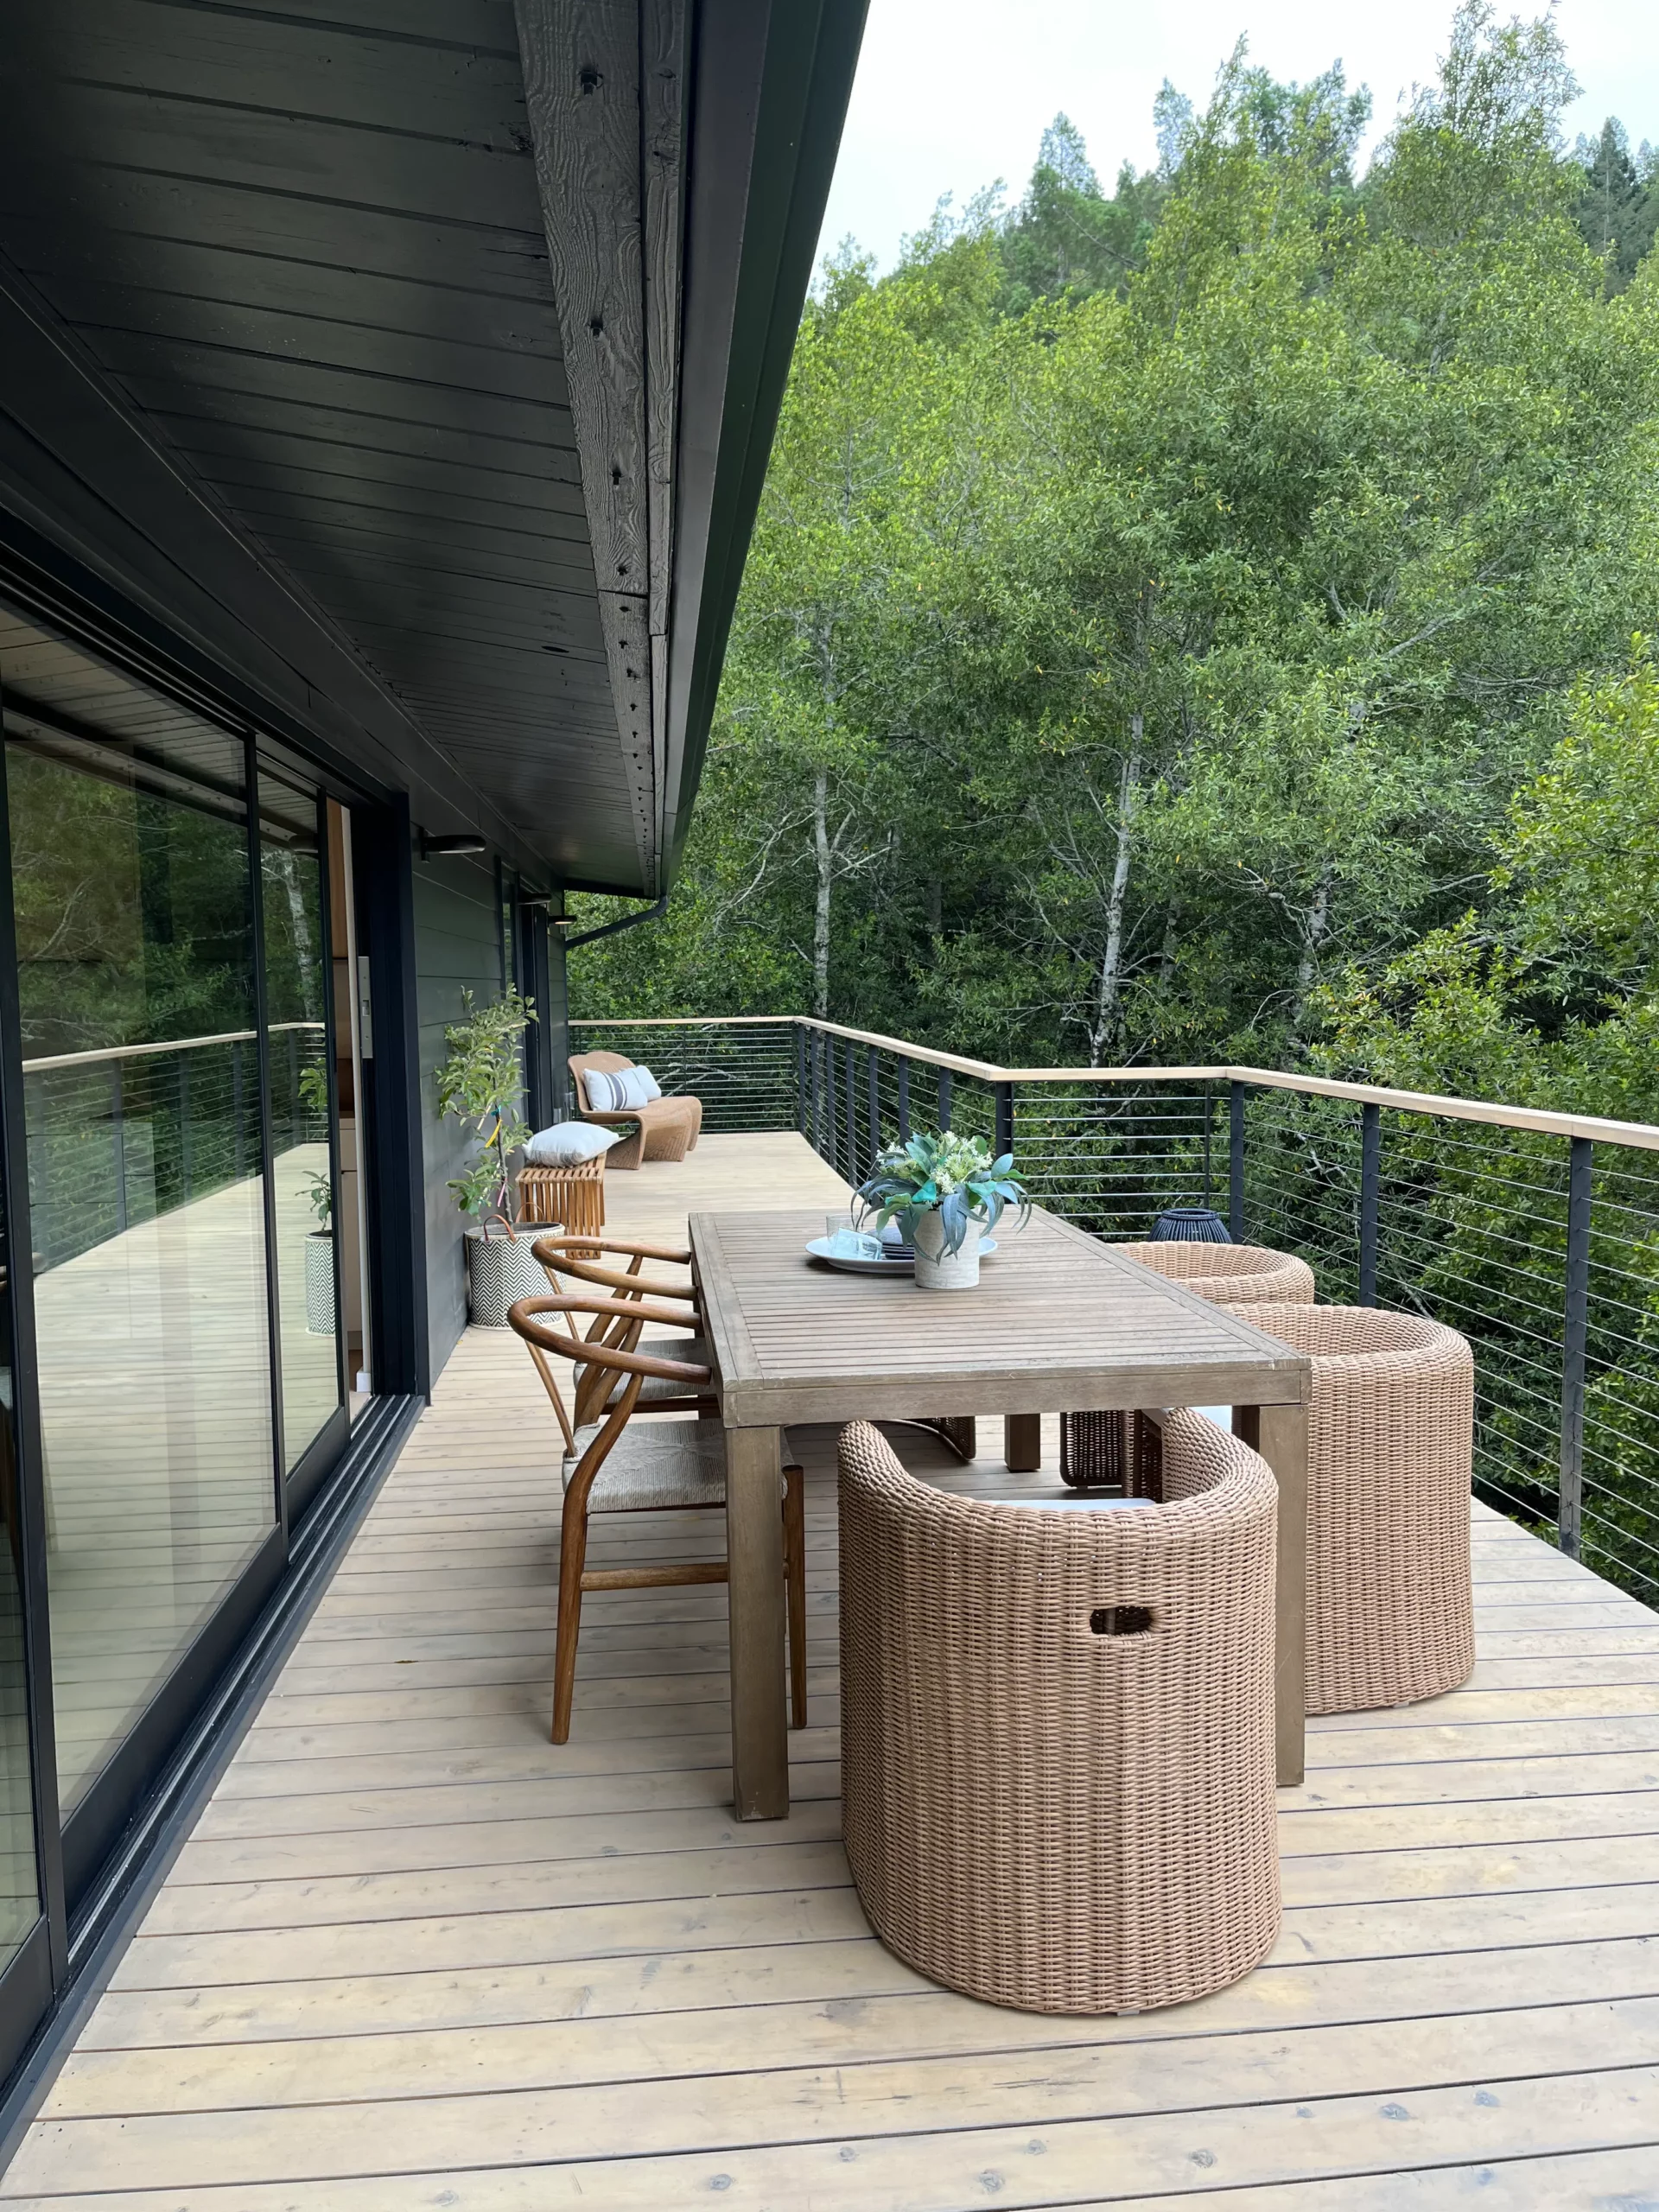 A deck with a table and chairs overlooking a wooded area.